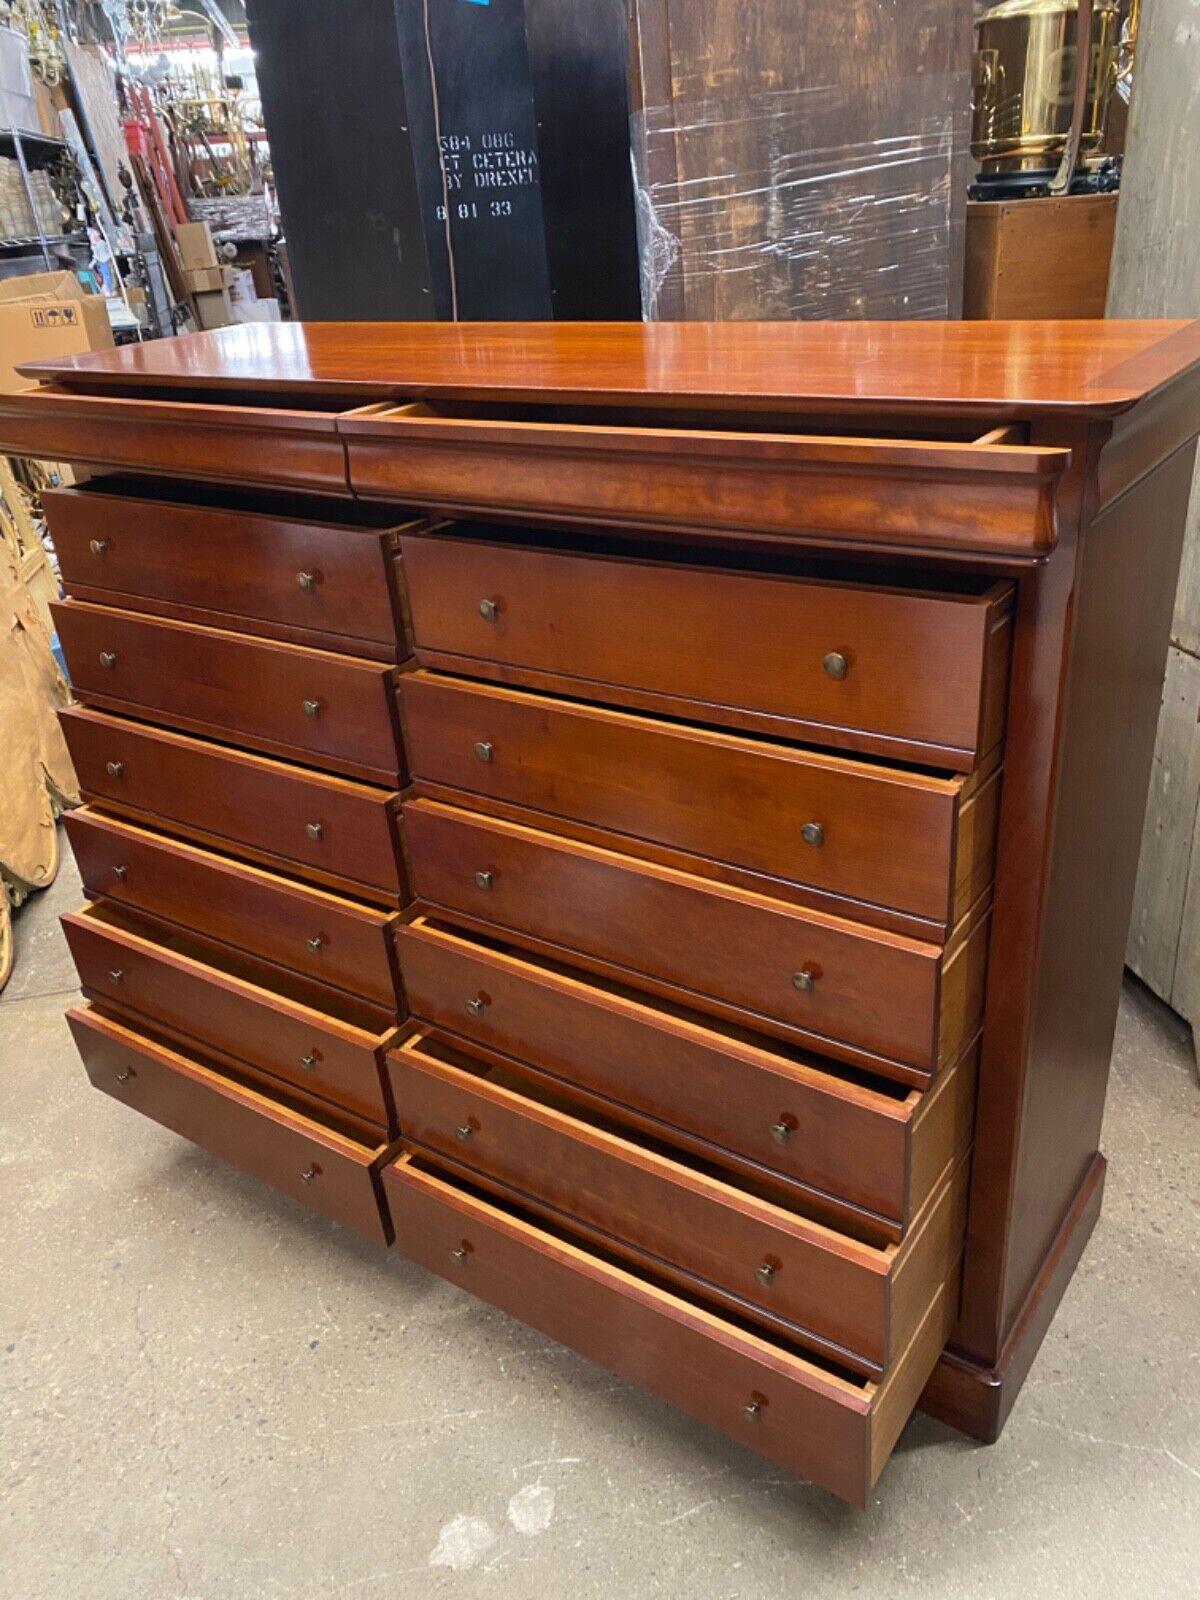 French Country Modern Solid Cherry Wood 14 Drawer Tall Chest Dresser - Made in France, Believed to be by Grange .Item featured is a large impressive size, original label, stamped “Made in France”, 14 dovetailed drawers, clean Modernist lines. Circa